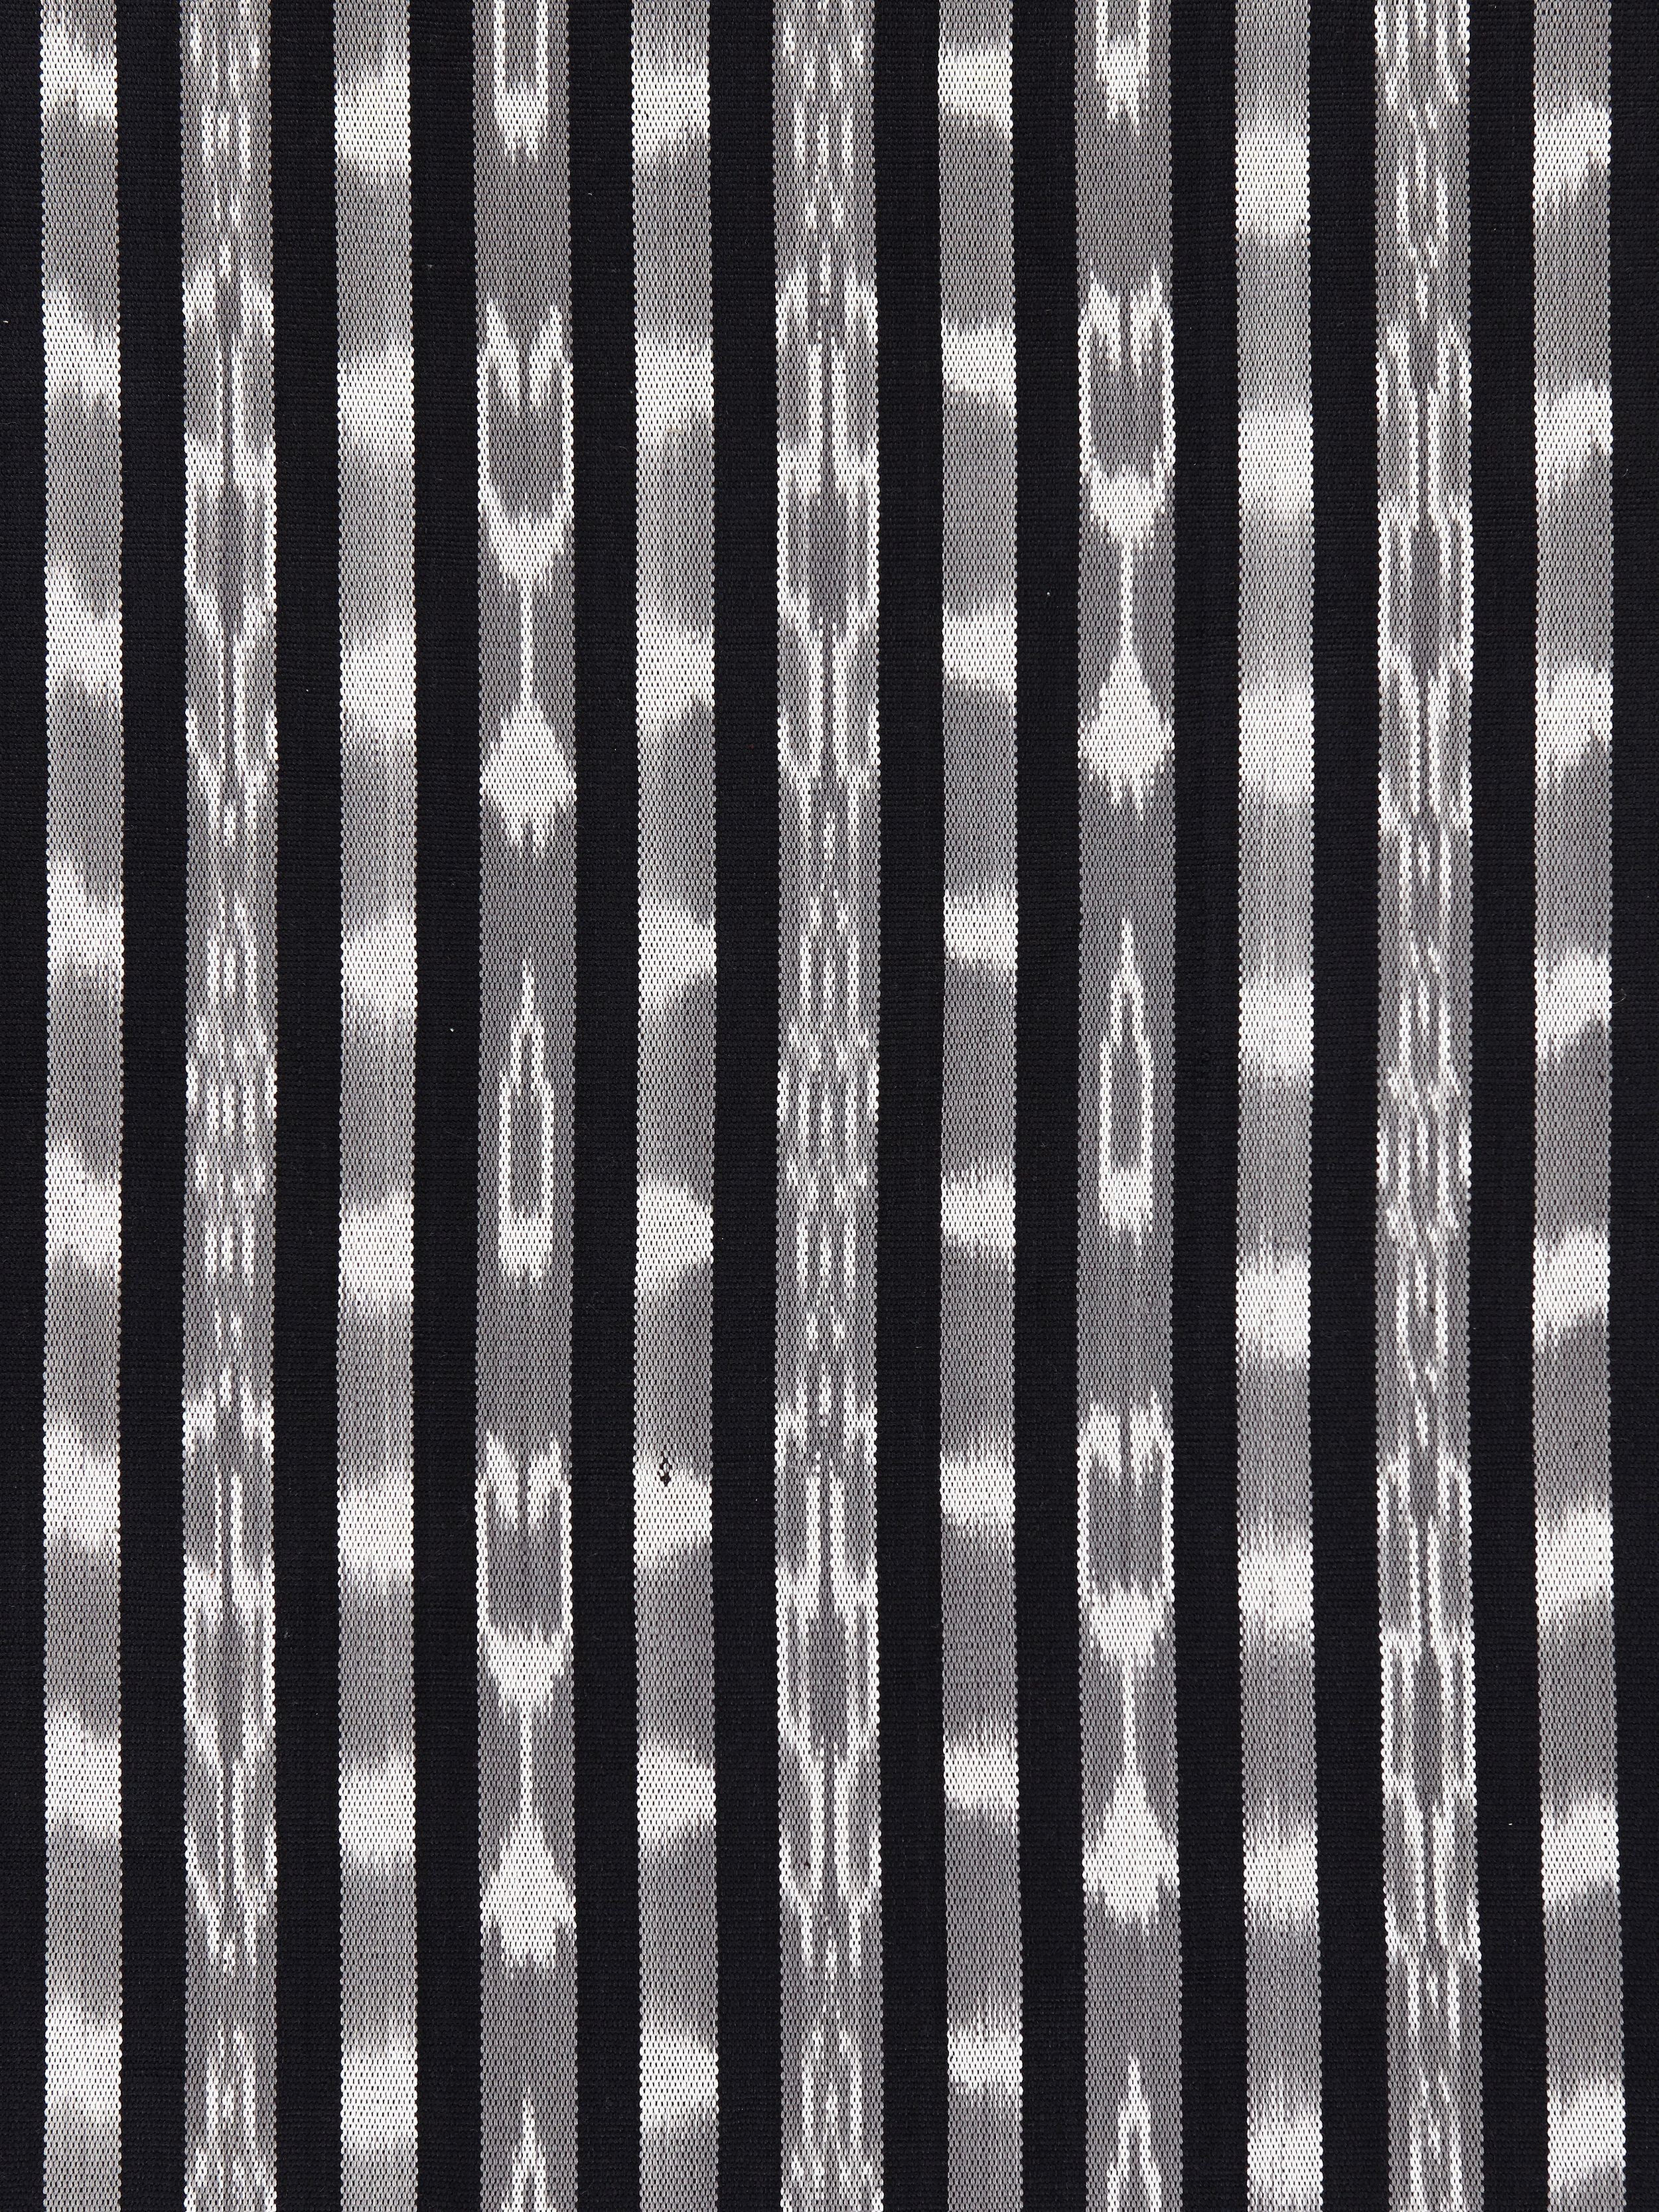 Jakarta Ikat Stripe fabric in charcoal color - pattern number SC 000327087 - by Scalamandre in the Scalamandre Fabrics Book 1 collection